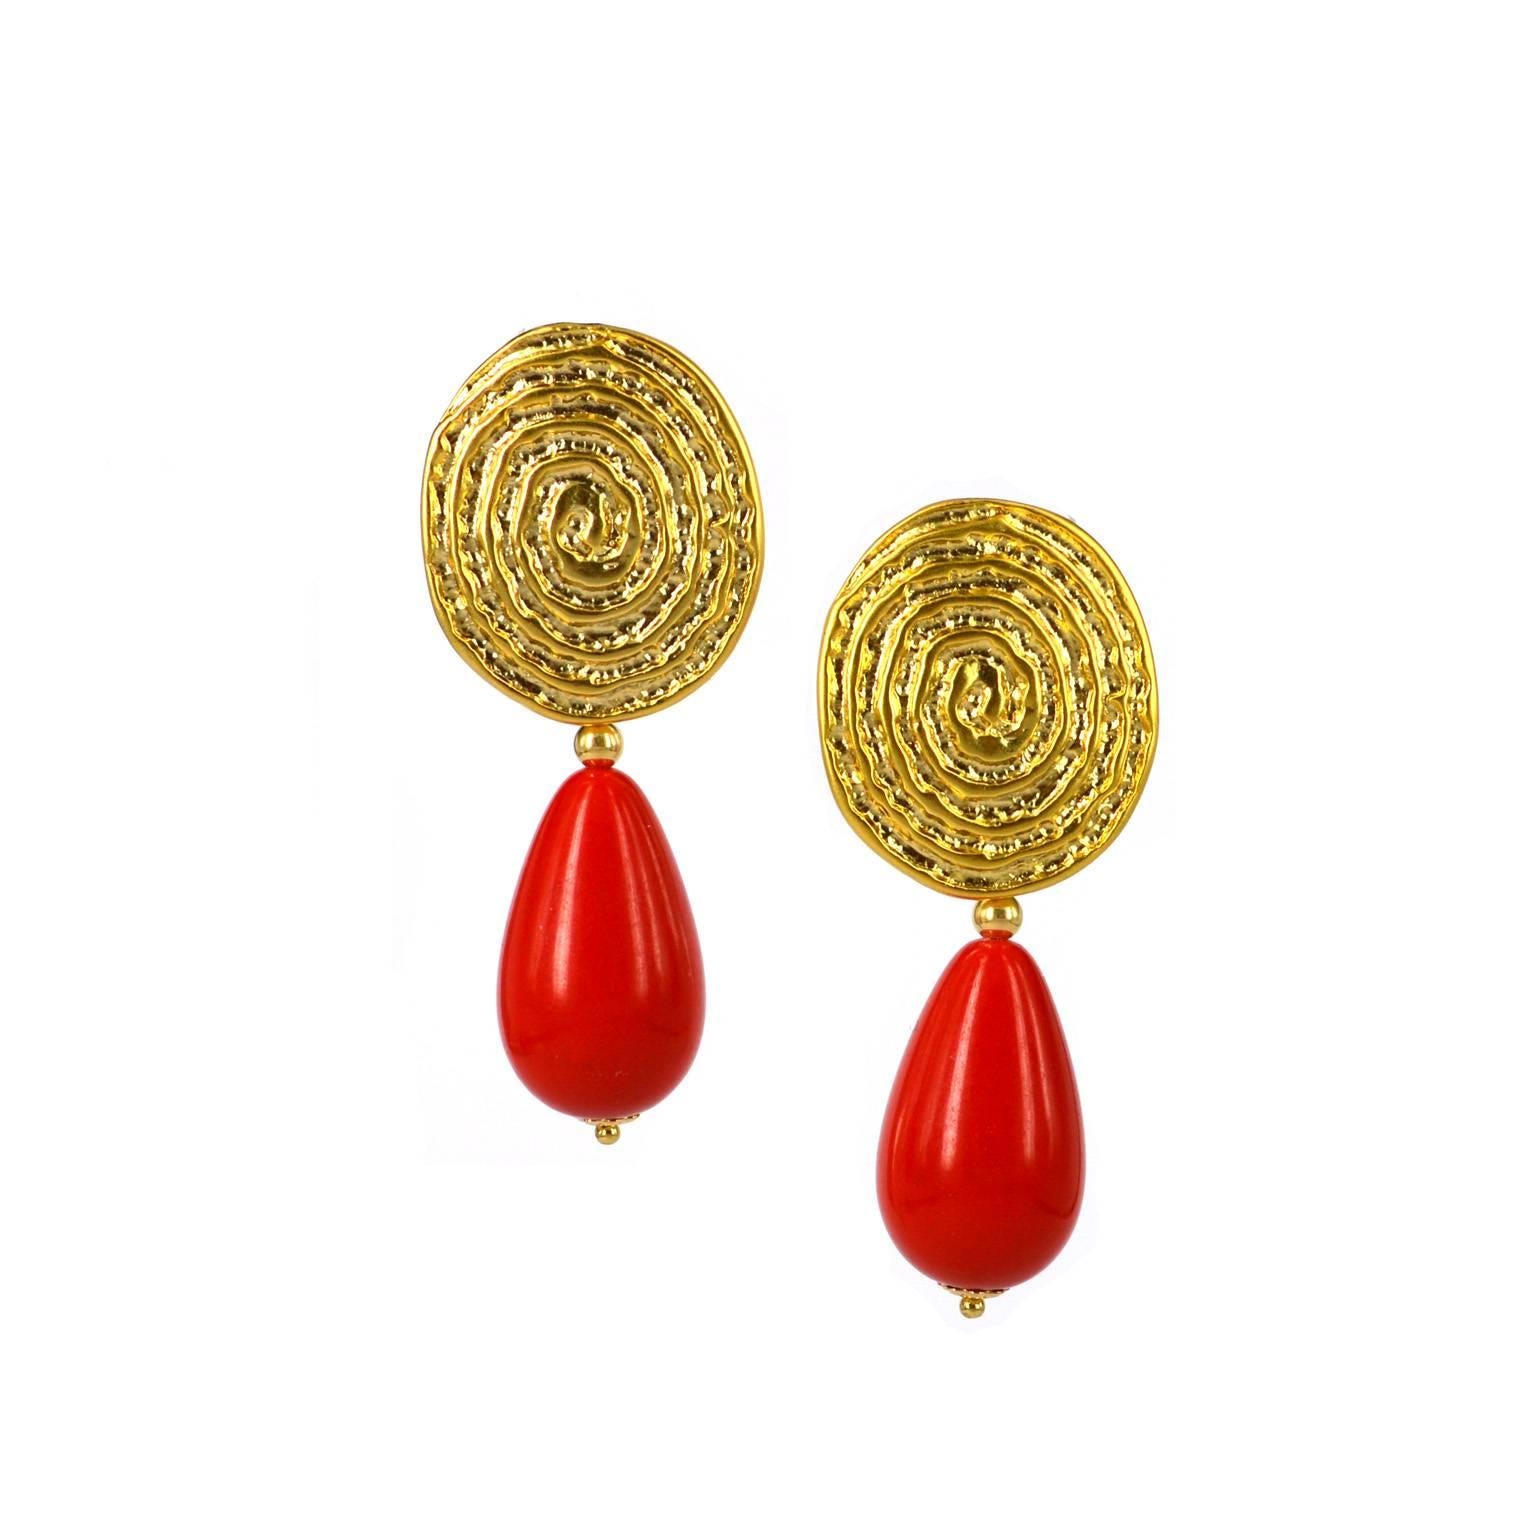 Gold plated Brass with a Sterling silver post studs with a Red resin teardrop, 14k Gold Filled headpin and 3mm bead.
Earring drop 43mm from stud
Resin teardrop is 20mm